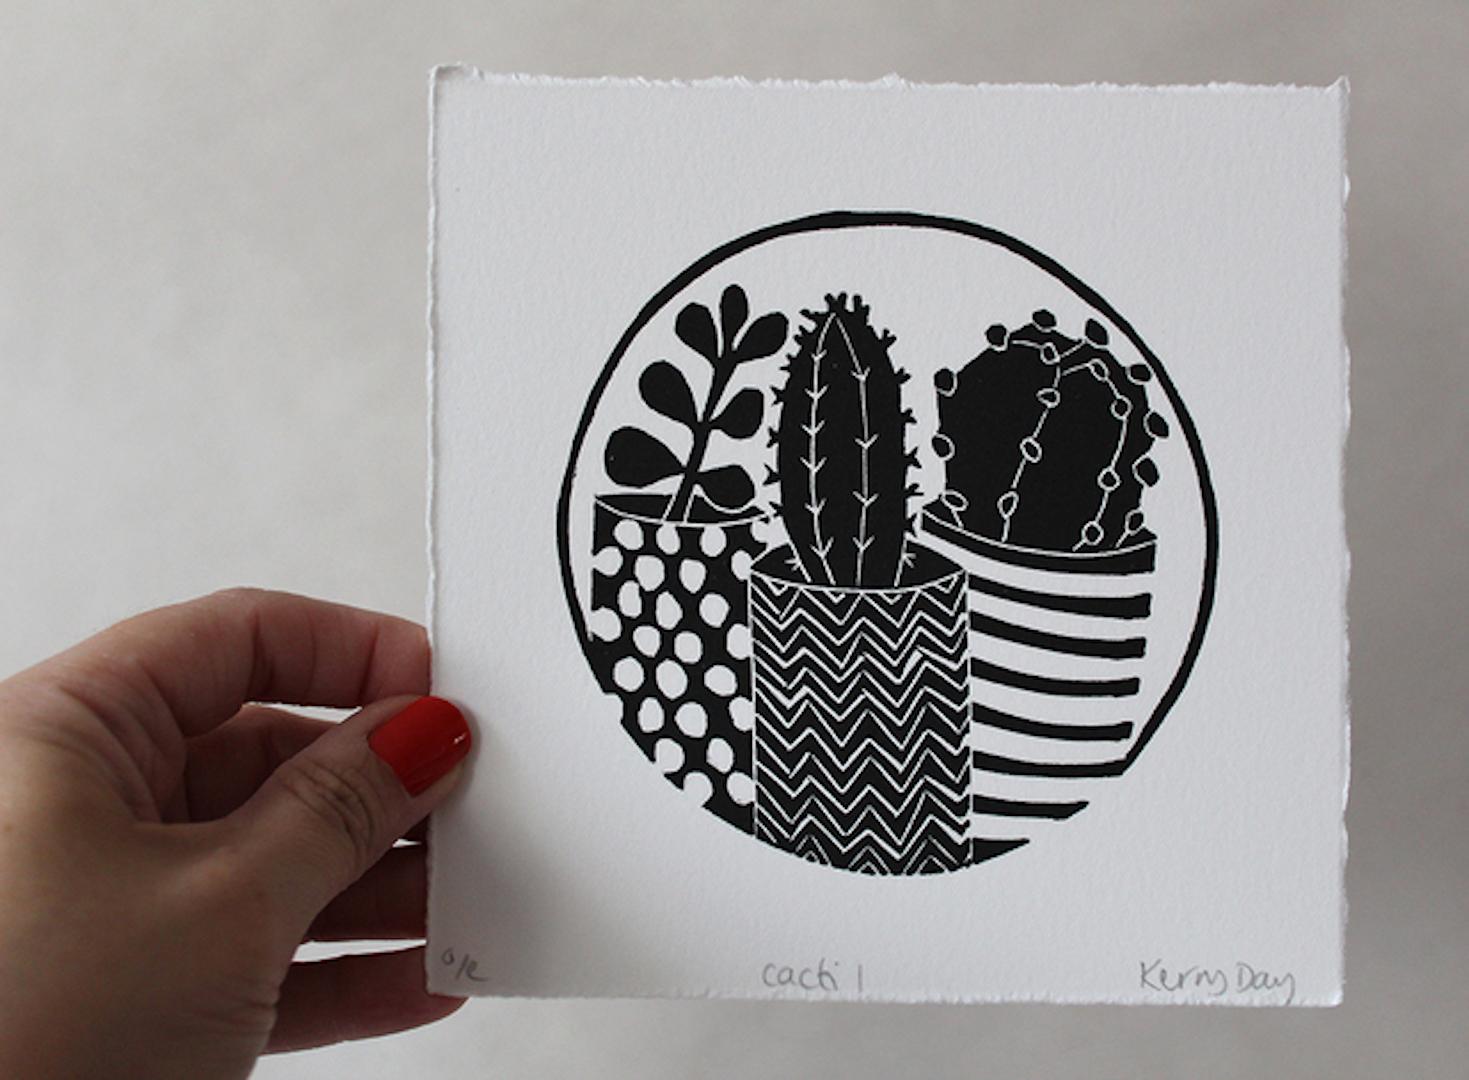 Kerry Day
Cacti 1
Open Edition Linocut Print on Somerset Paper
Image size: H 10cm x W 10cm
Sheet Size: H 14cm x W 14cm
Titled and signed by the artist

Cacti 1 is an open edition linocut print by Kerry Day. This piece is part of Kerry’s series of